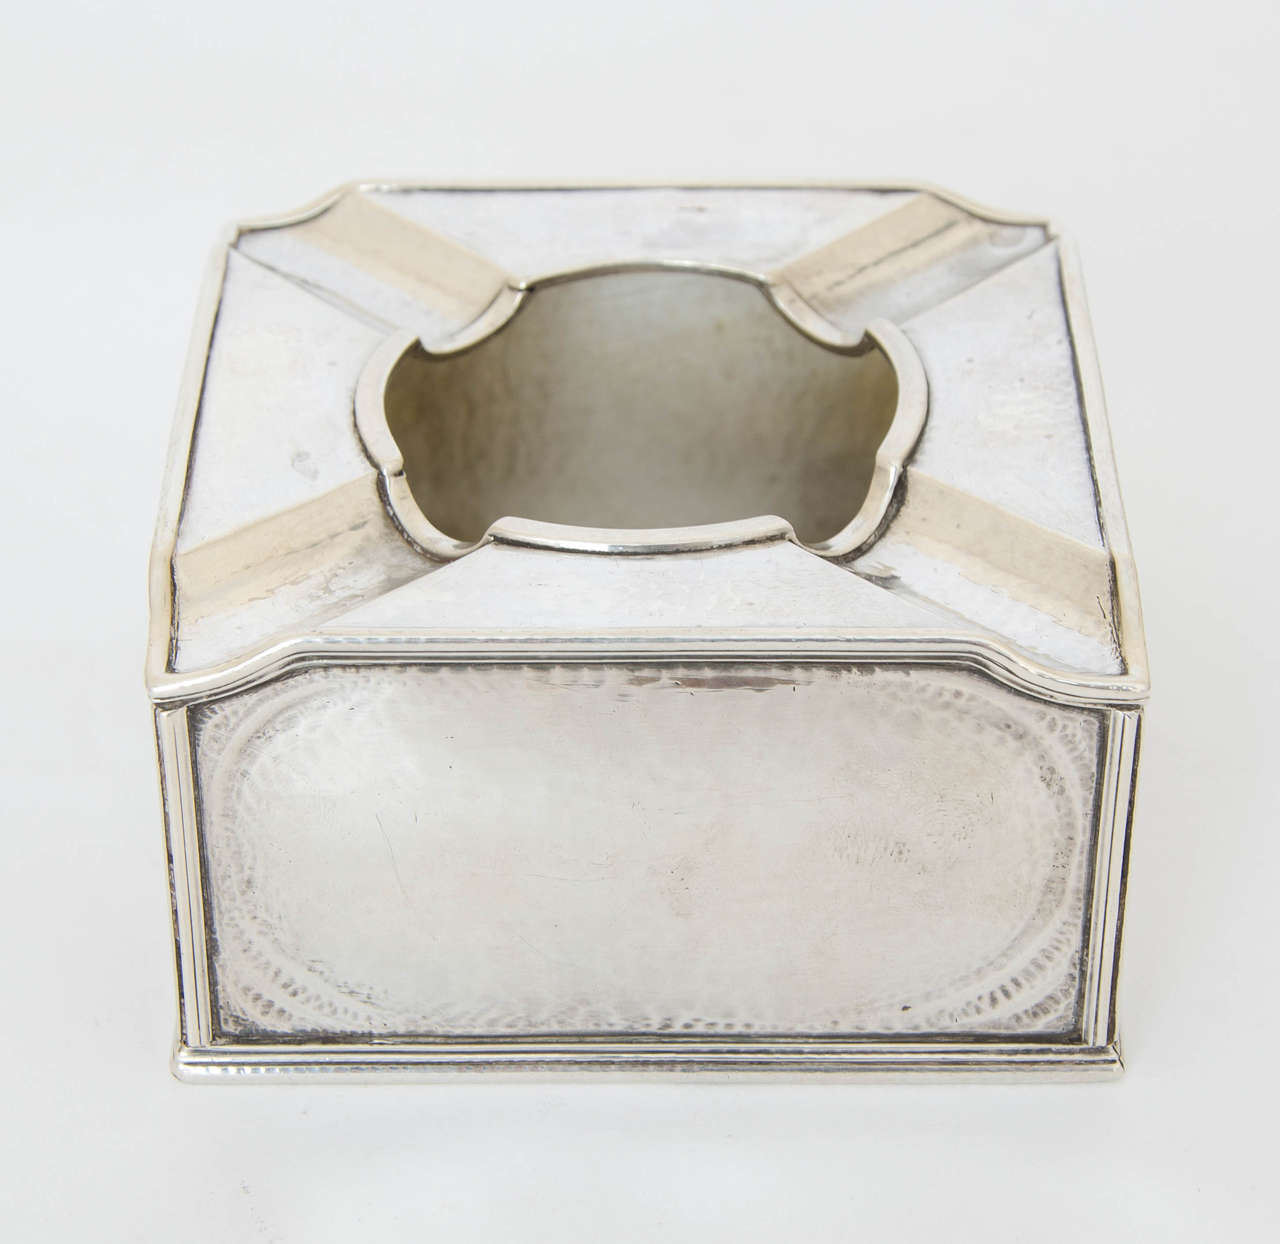 An Omar Ramsden cigar ashtray, made in London 1929.
Omar Ramsden is recognised as a master in the field of silver design and his pieces feature in most good collections of 20th century design. Along with his iconic or makers mark this piece is also